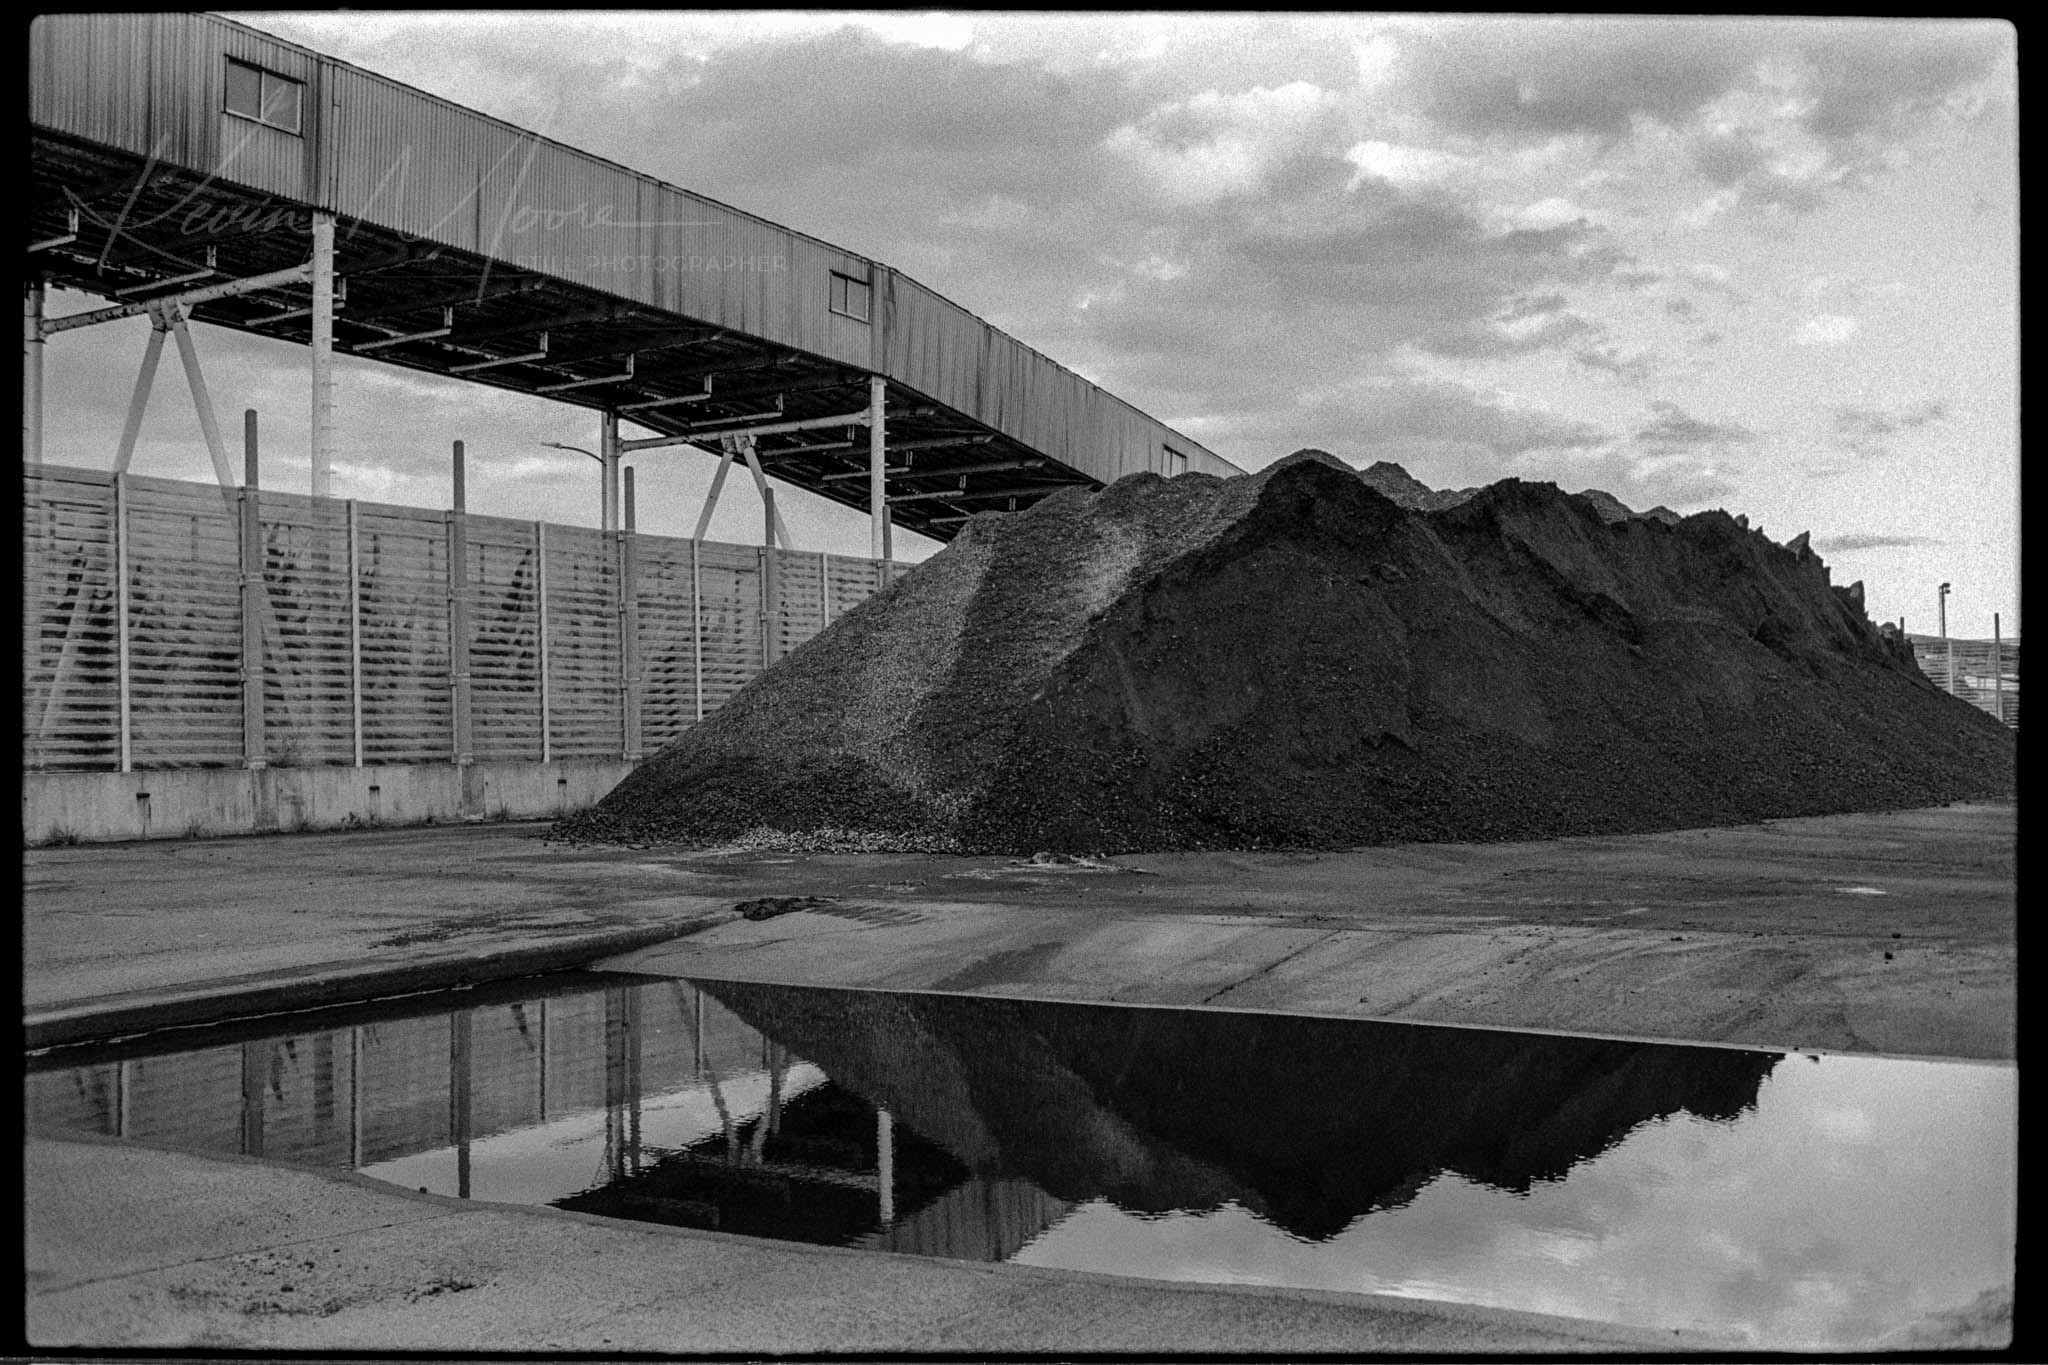 Black and white image of an idle industrial yard with gravel pile and mirrored reflections.